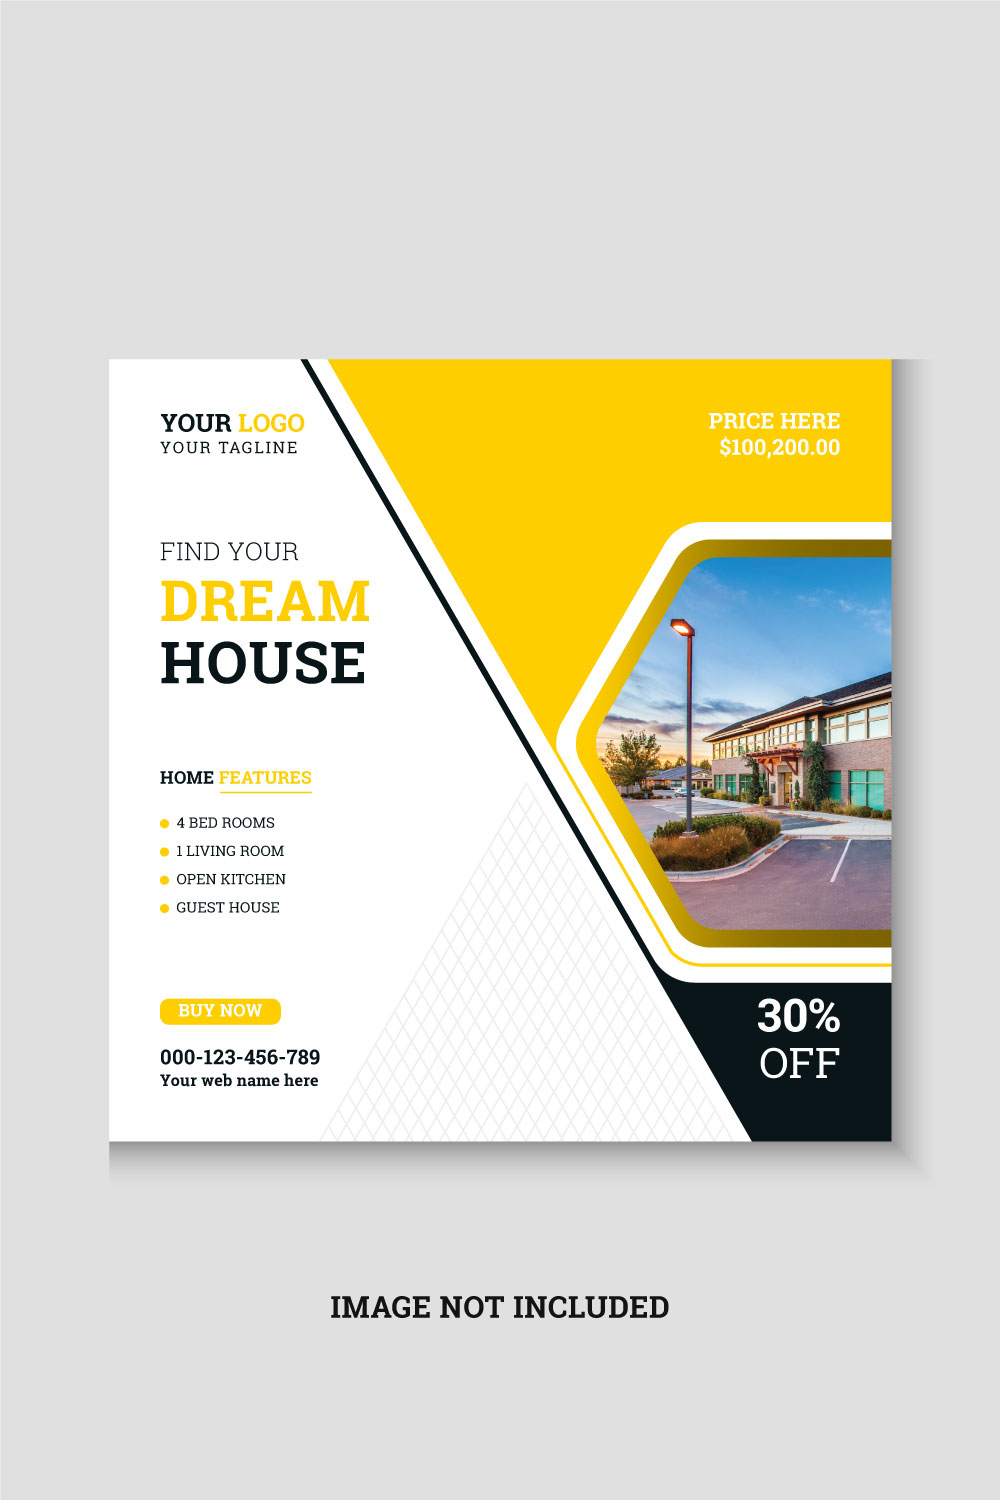 Modern and creative real estate agency social media post design pinterest preview image.